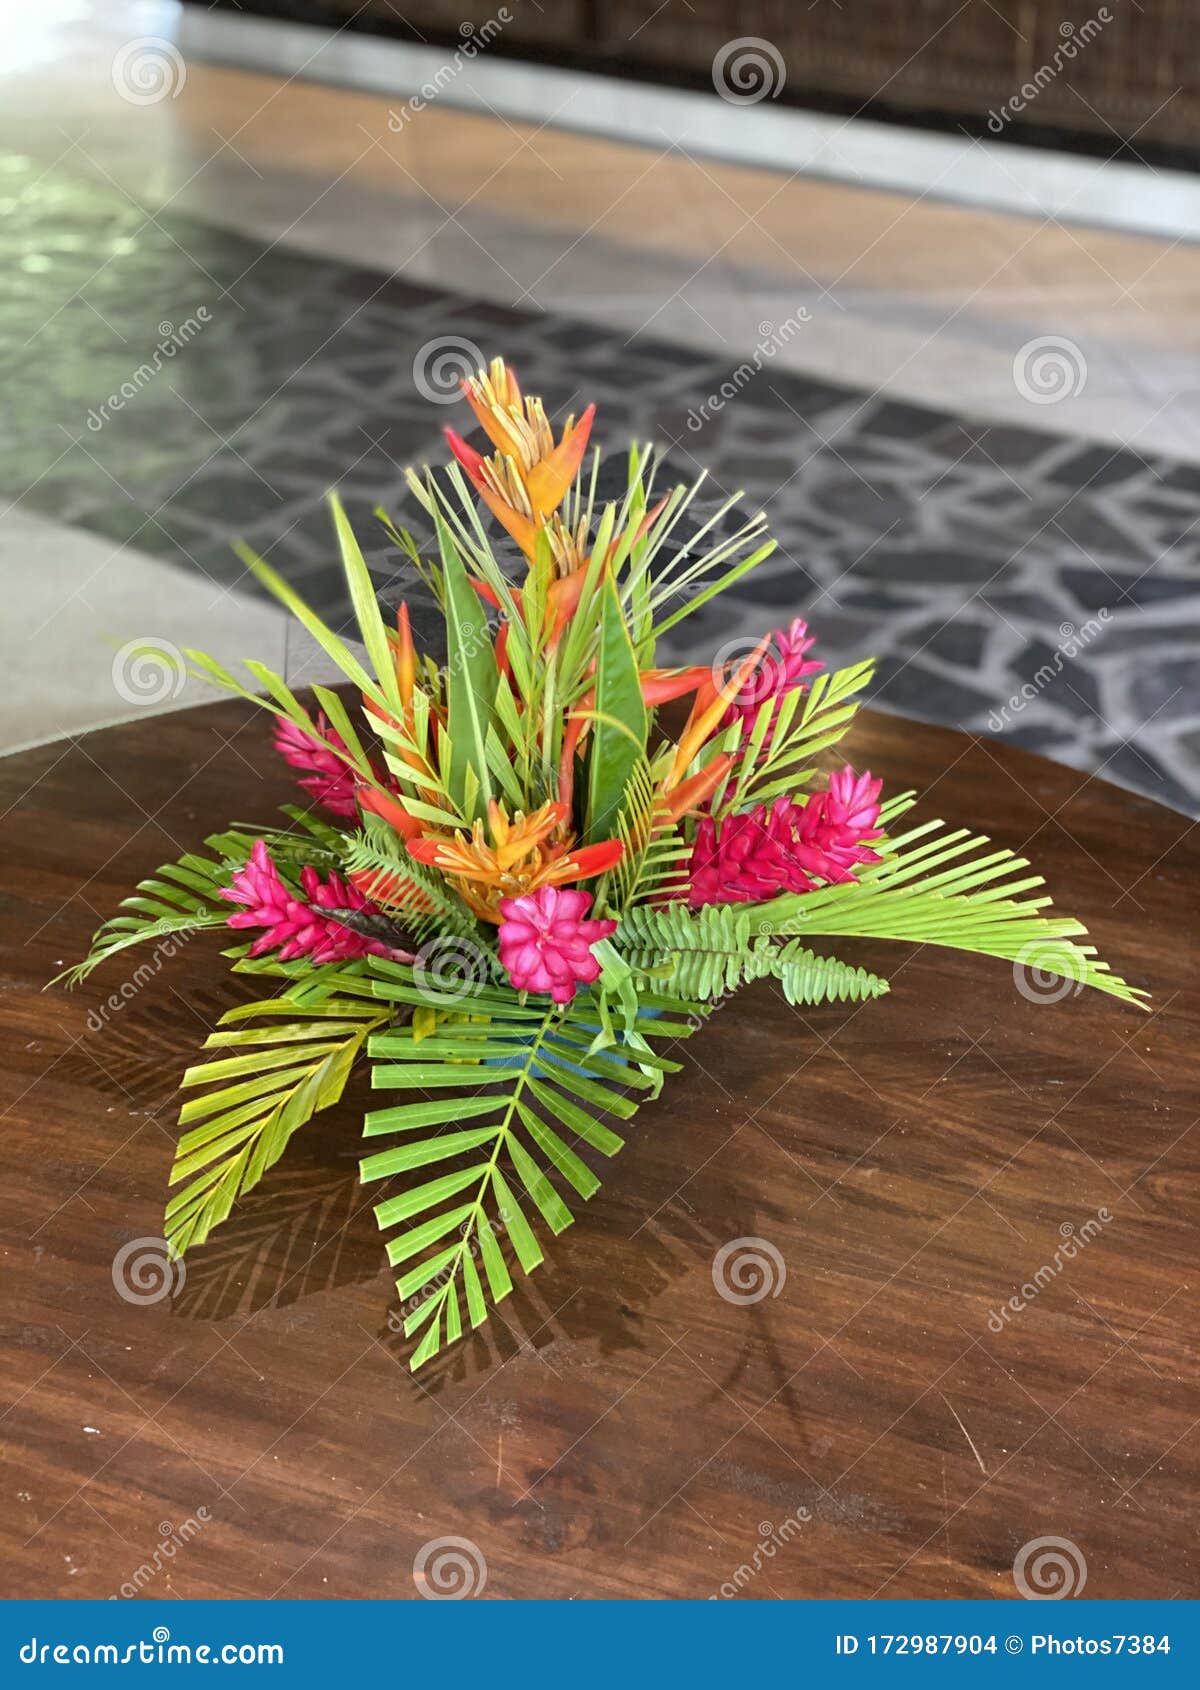 Display Of Tropical Flowers And Leaves On A Hotel Lobby Table Stock Photo Image Of Tropical Pink 172987904